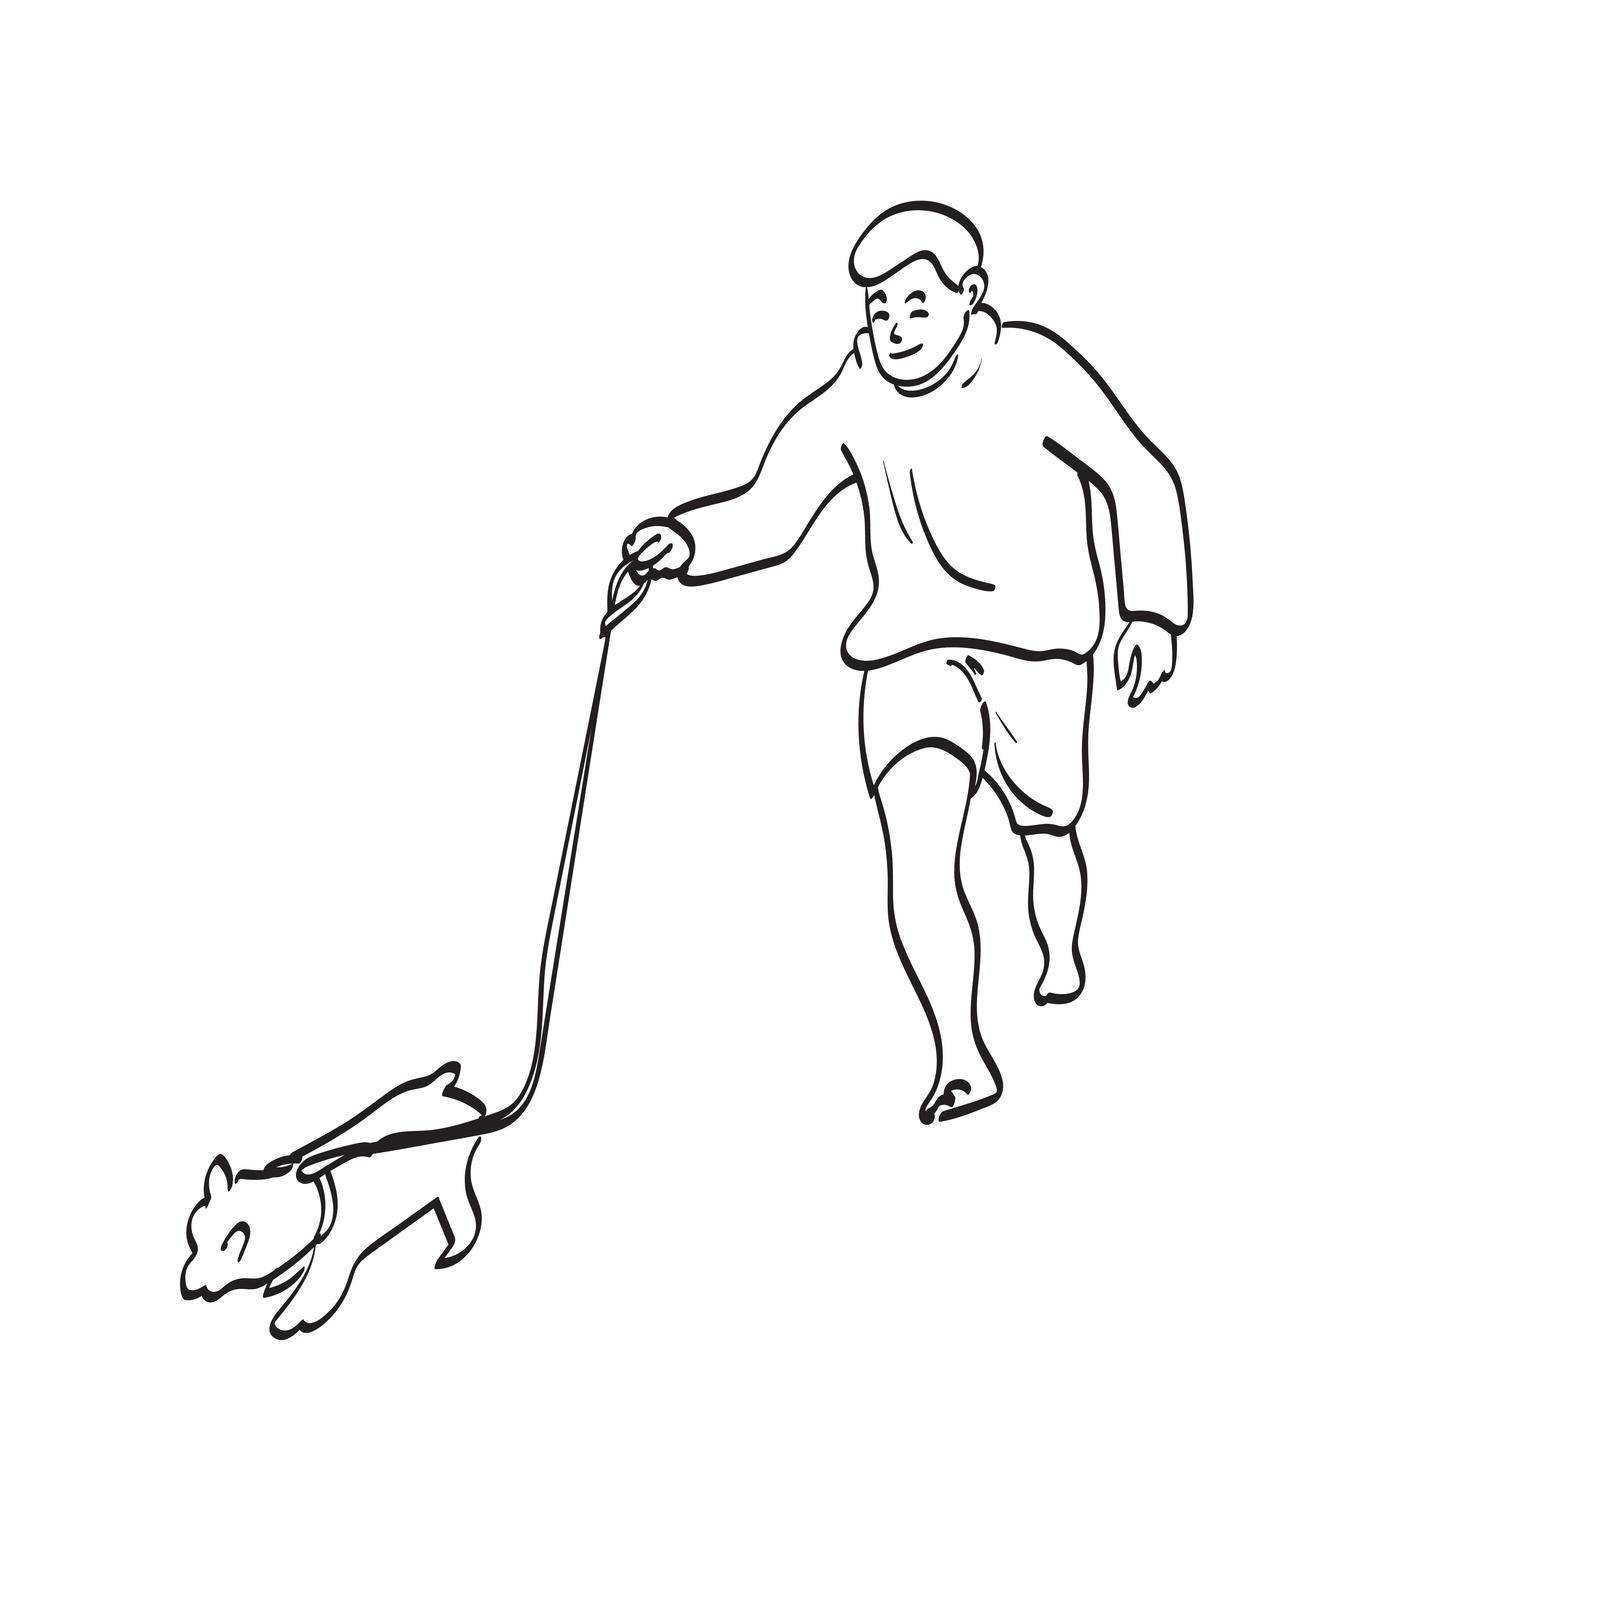 man walking with his dog illustration vector hand drawn isolated on white background line art.  by tidarattj